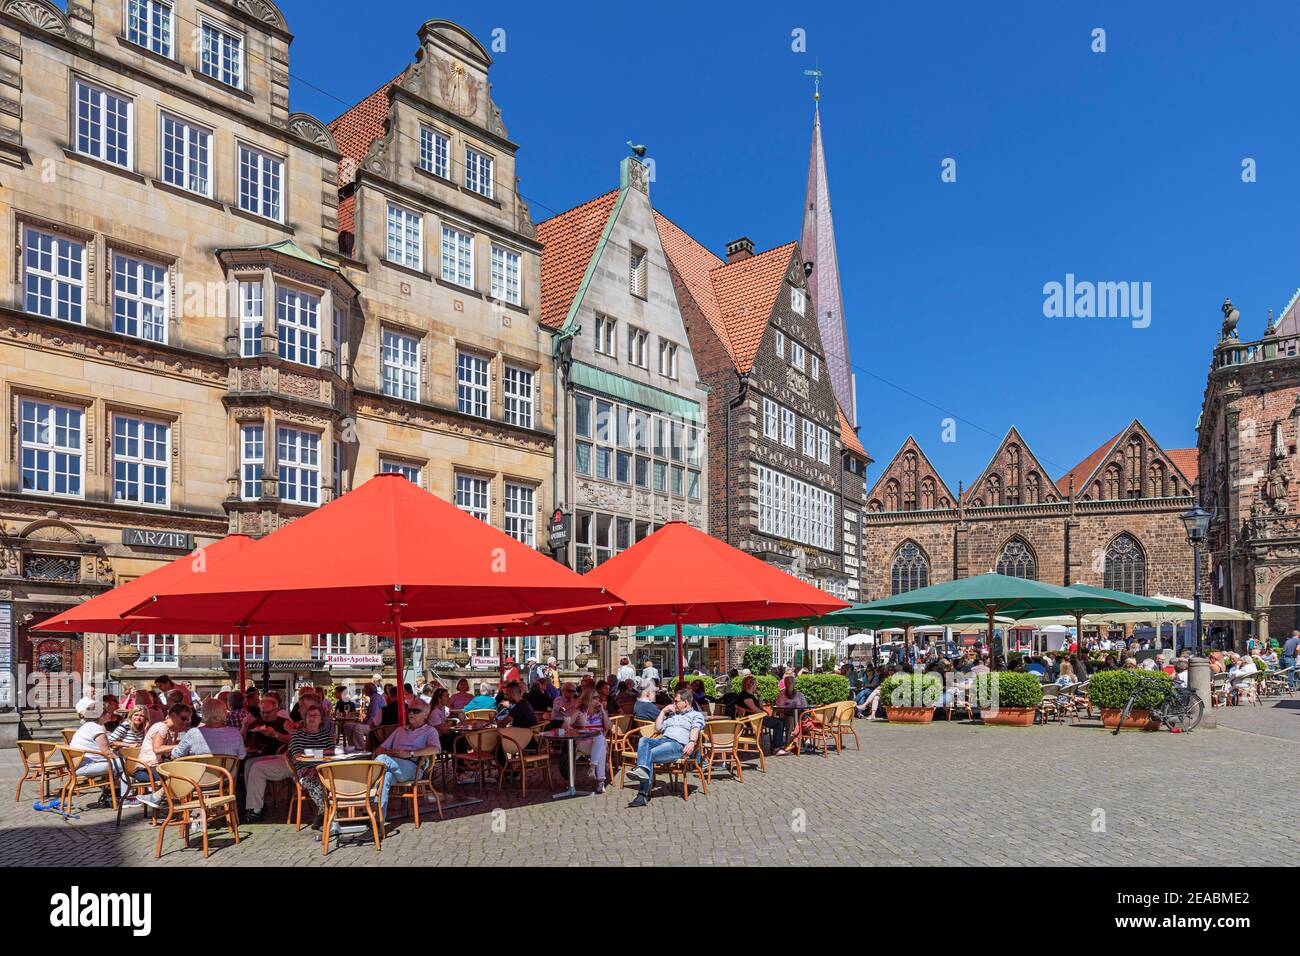 Street cafe, historic town houses on the market square, Bremen, Stock Photo